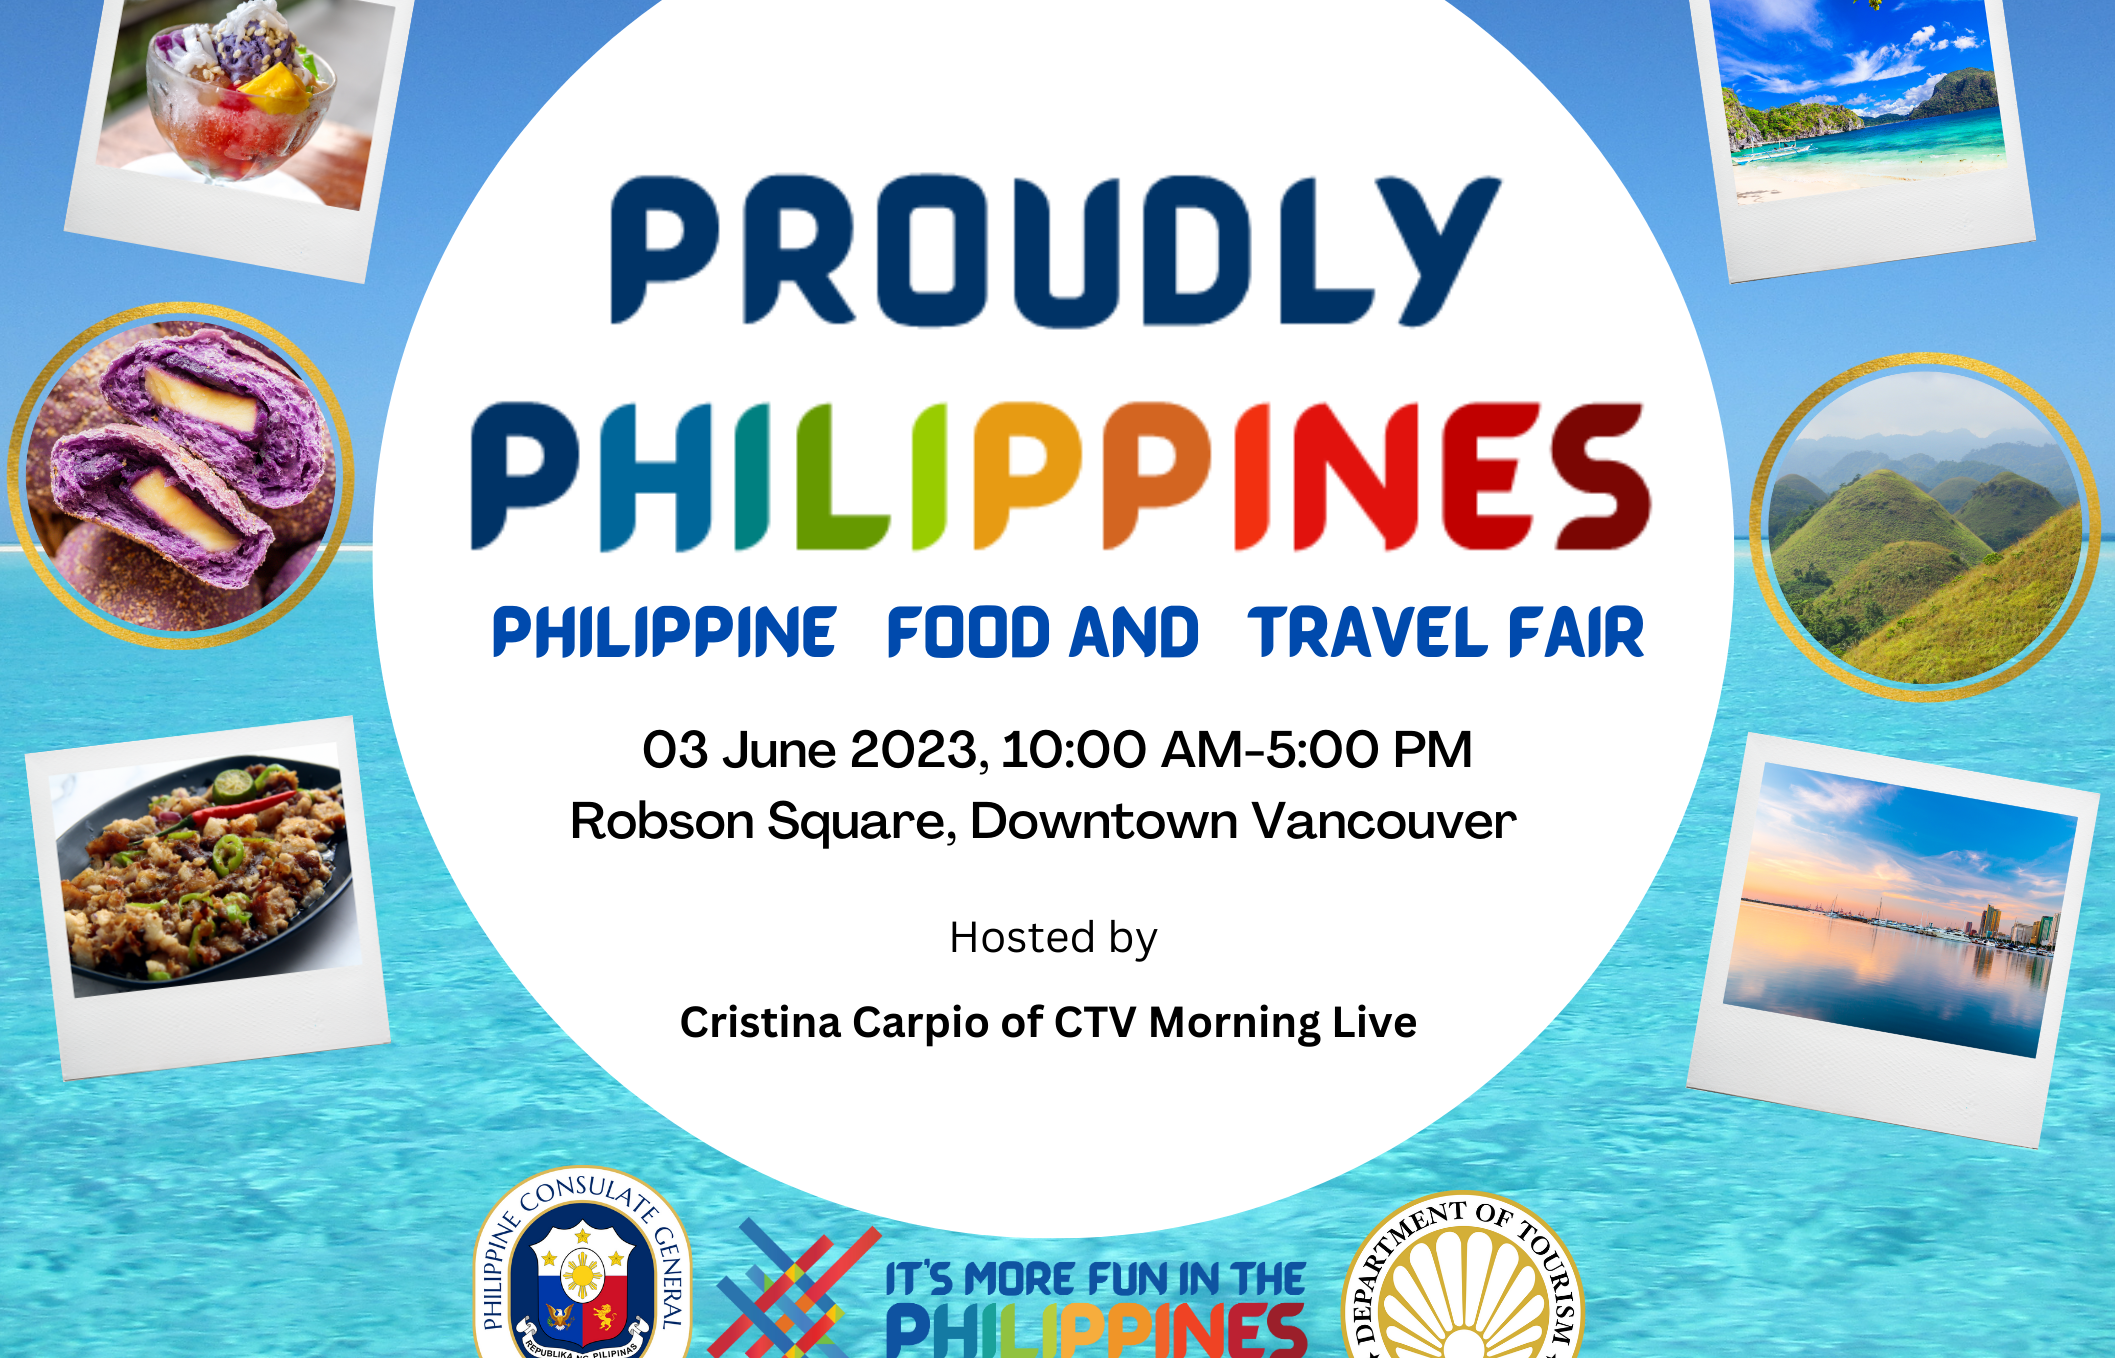 https://www.vancouverpcg.org/wp-content/uploads/2023/05/Proudly-PH-2023-1-FEATURED-e1684361940583.png